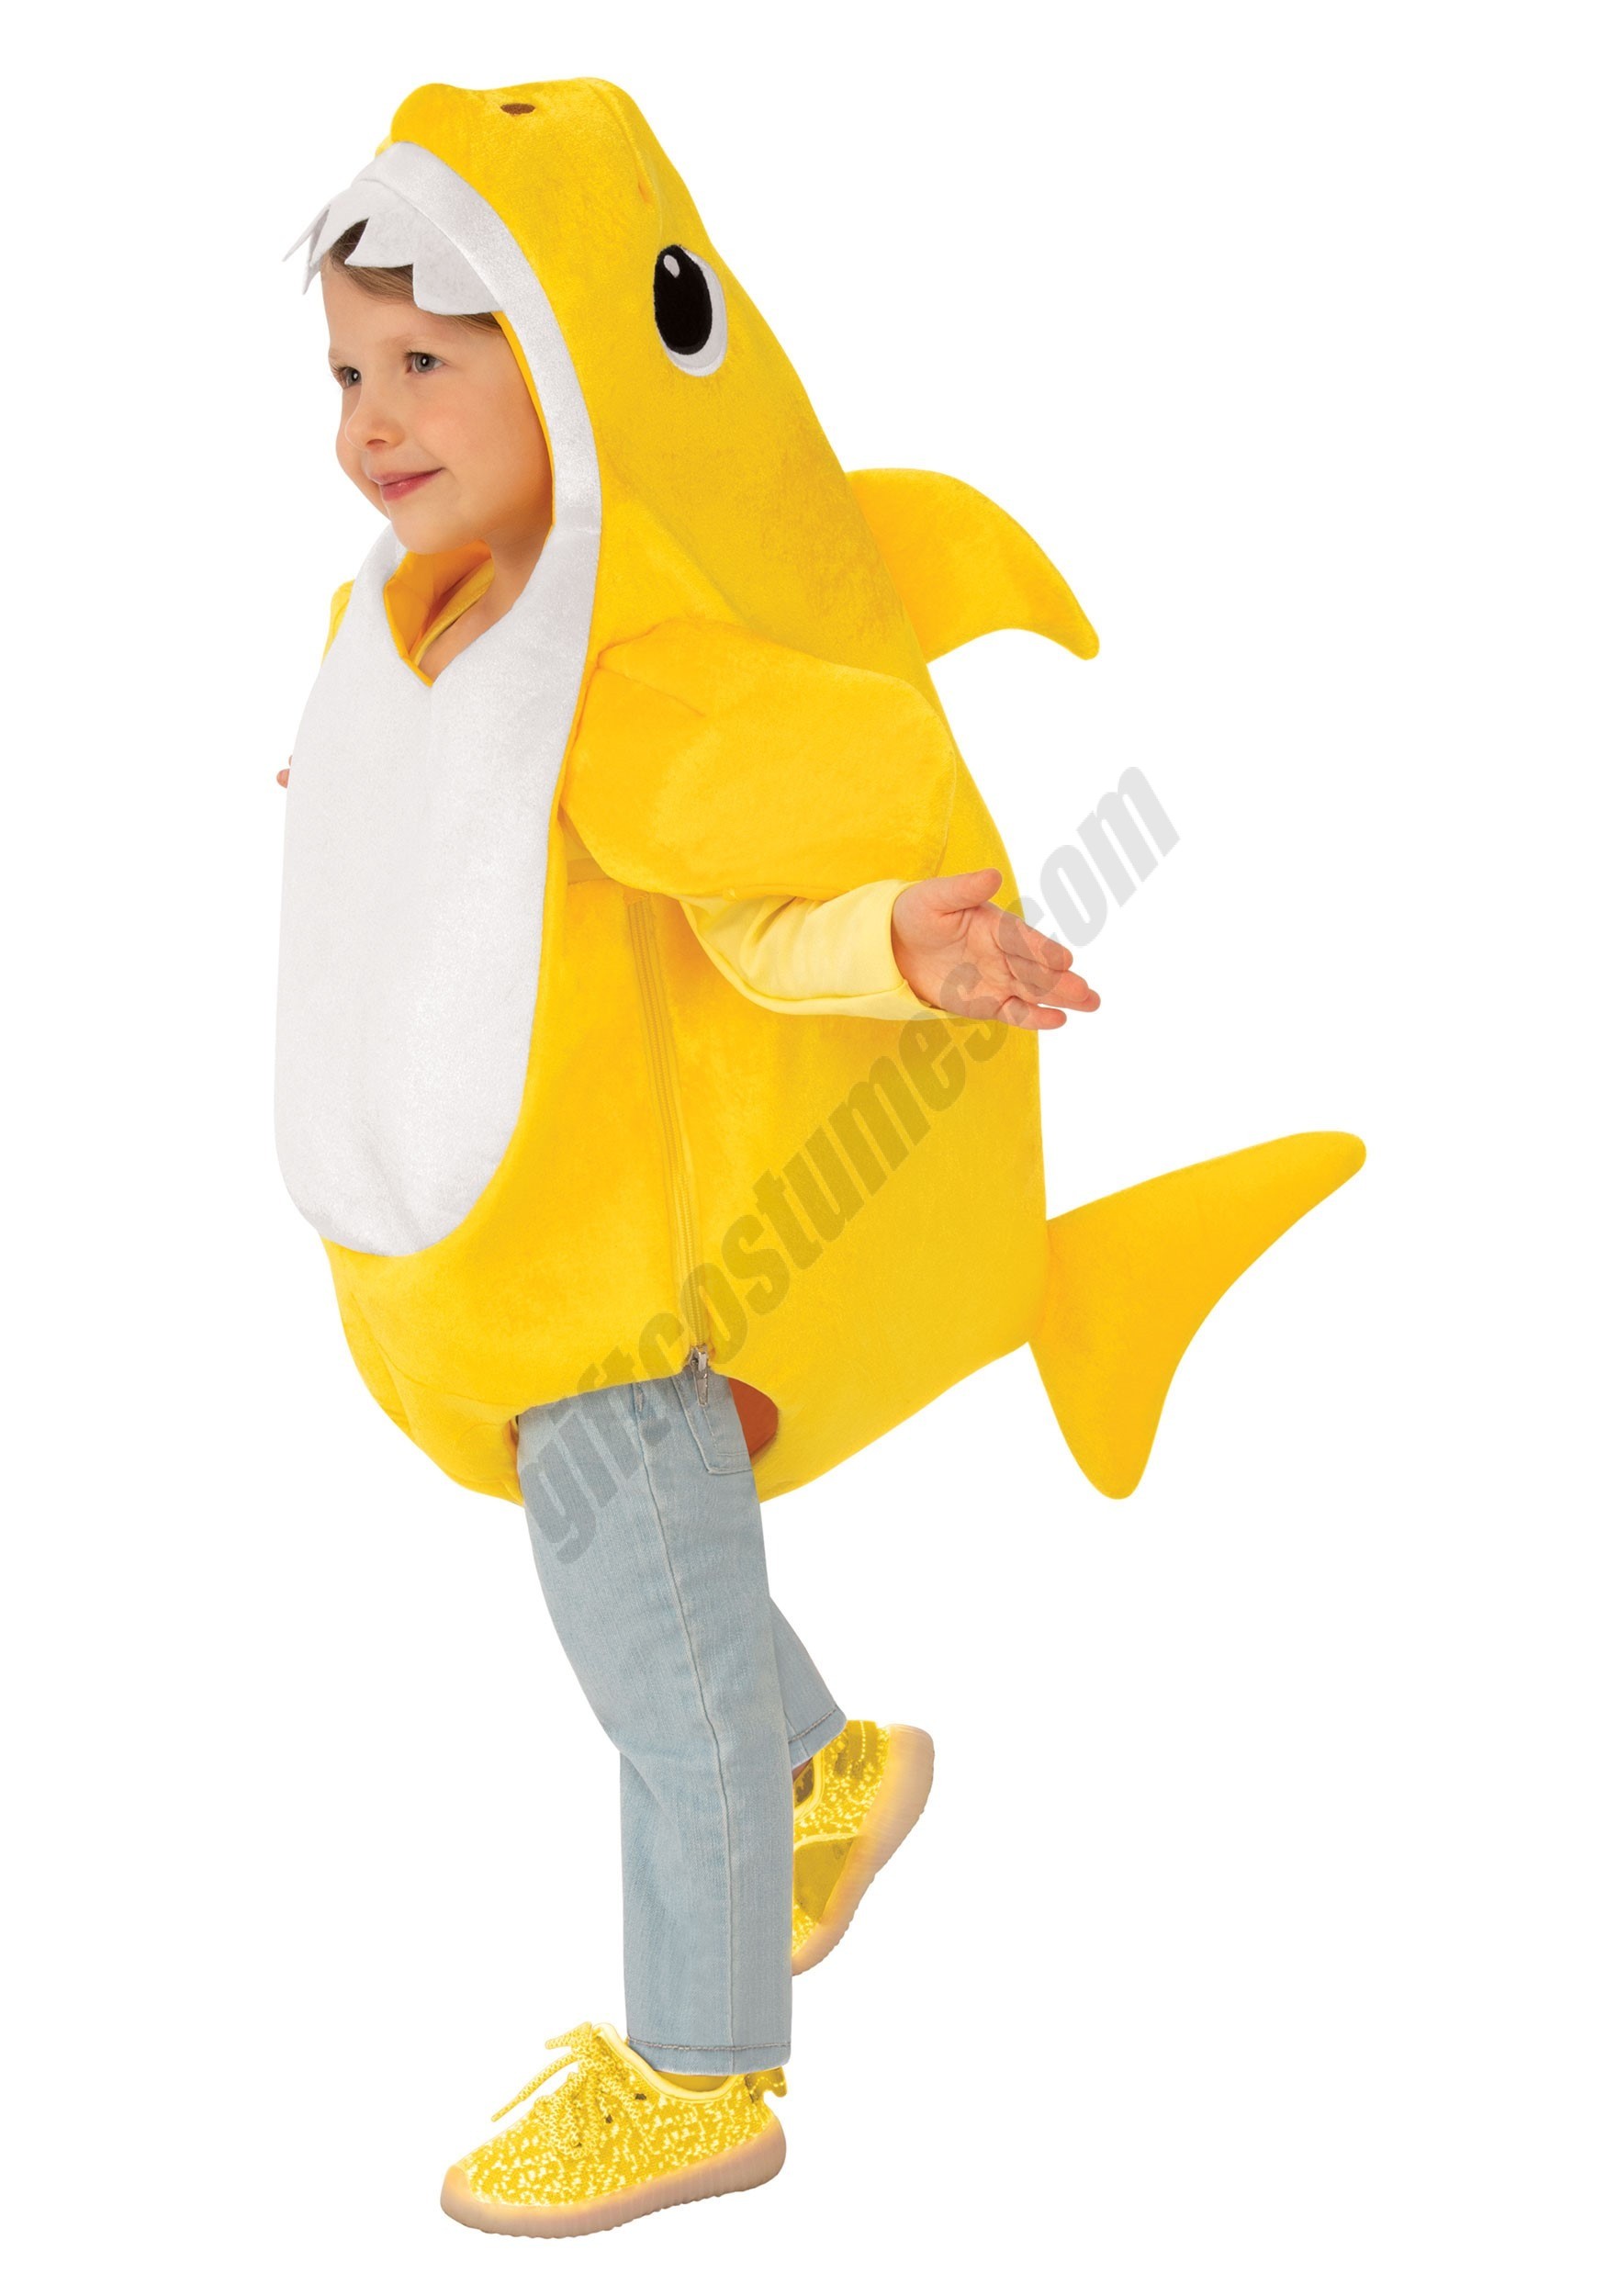 Baby Shark Toddler Costume with Sound Chip Promotions - Baby Shark Toddler Costume with Sound Chip Promotions